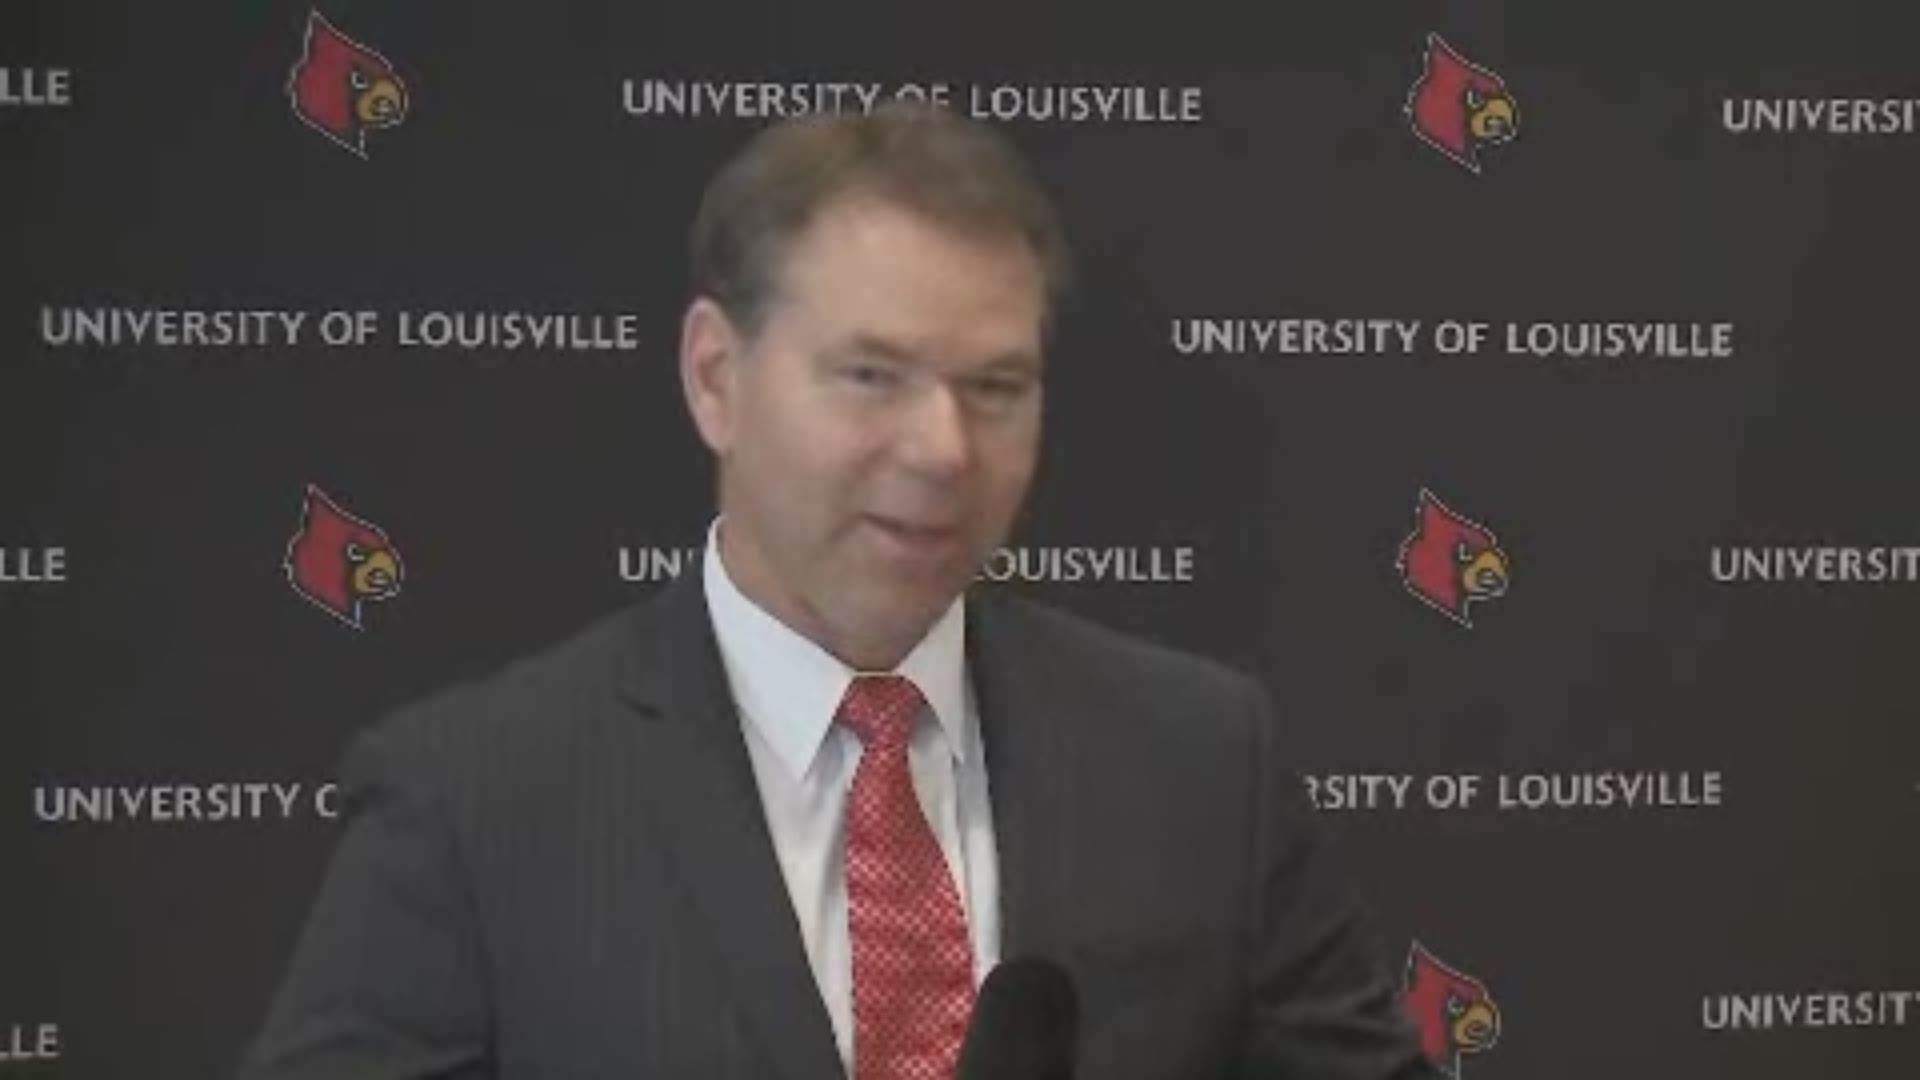 Tyra was approved by multiple UofL boards as the new athletic director.